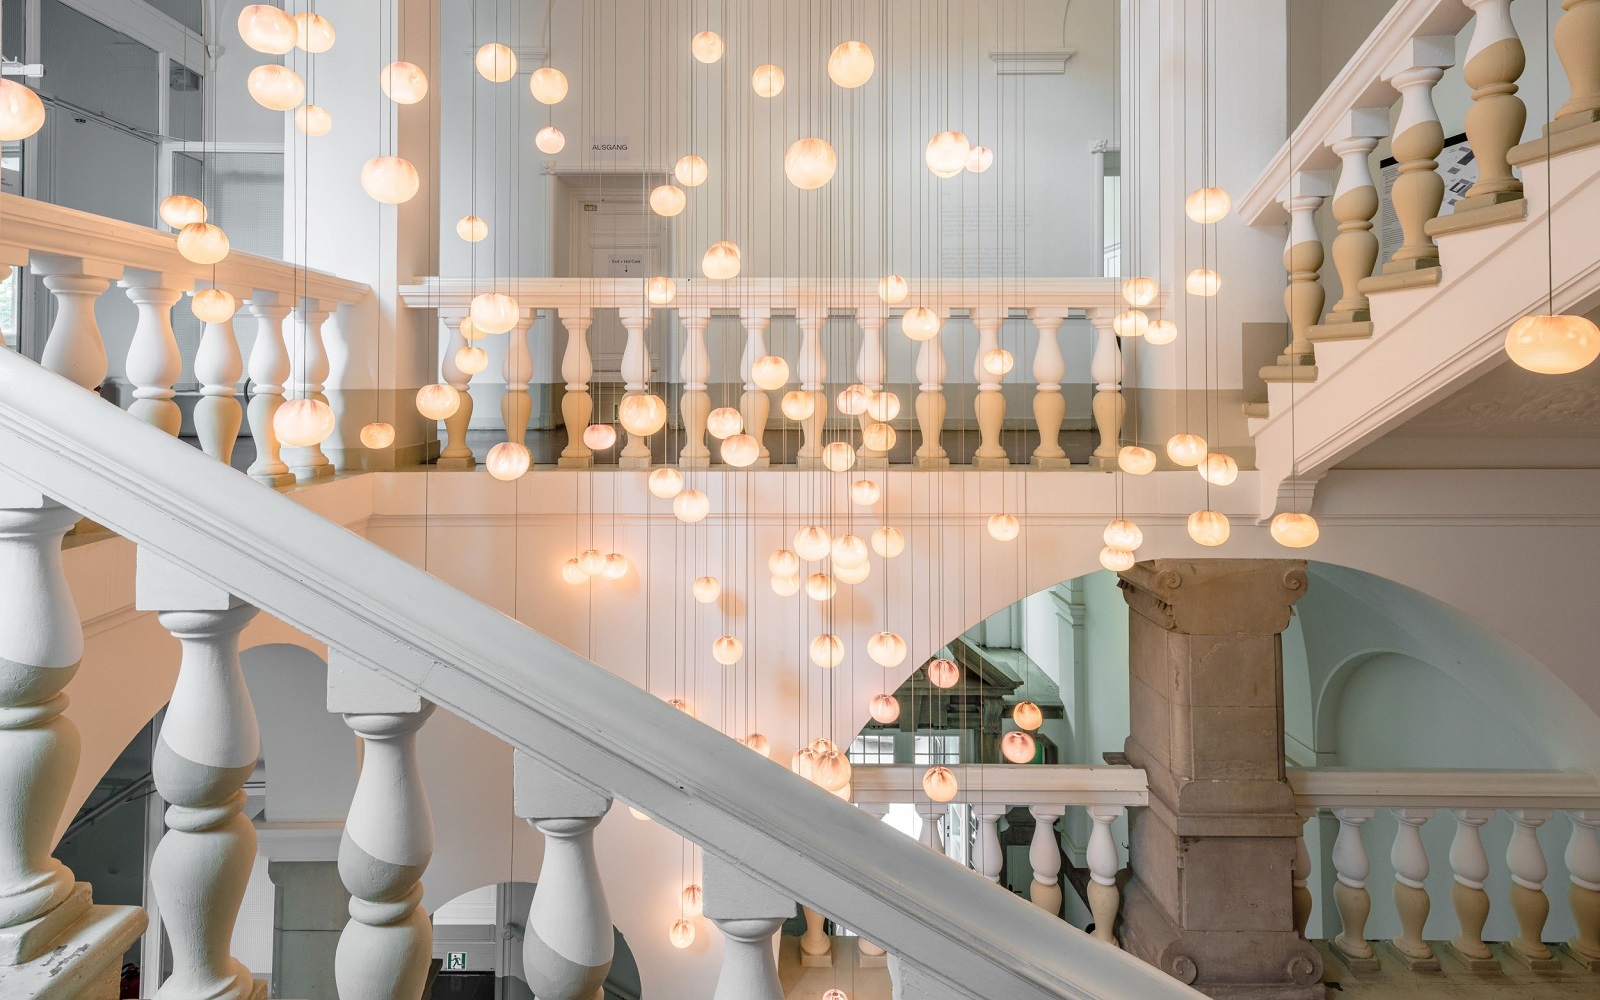 interior hallway and stairway of Wilmina hotel in white and cream with statement hanging lights in the centre